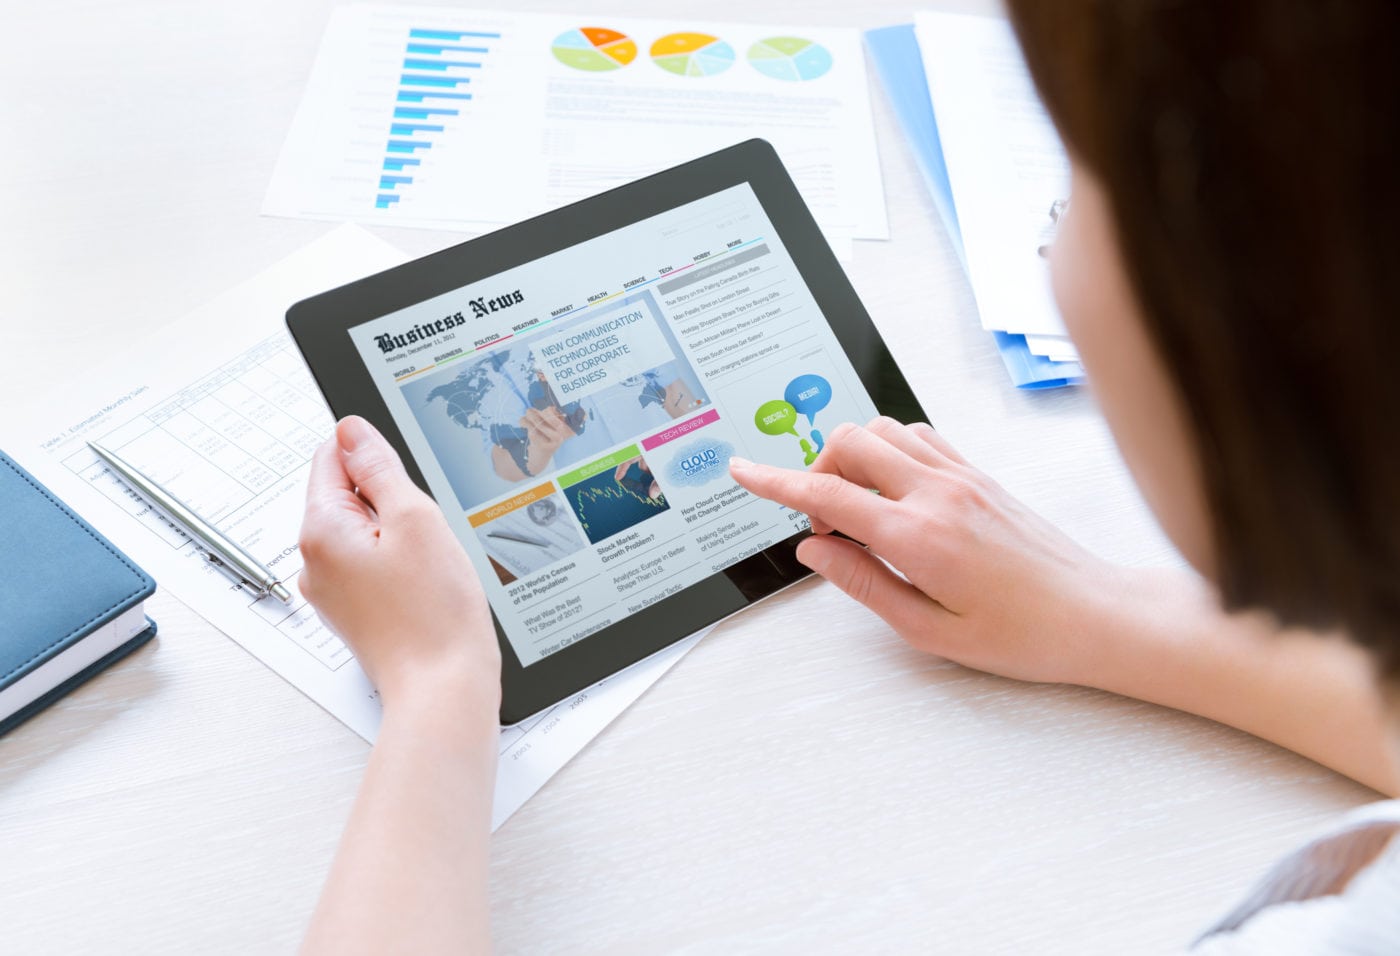 Improving Digital Subscription Adoption: A Look at Two Newspaper Approaches